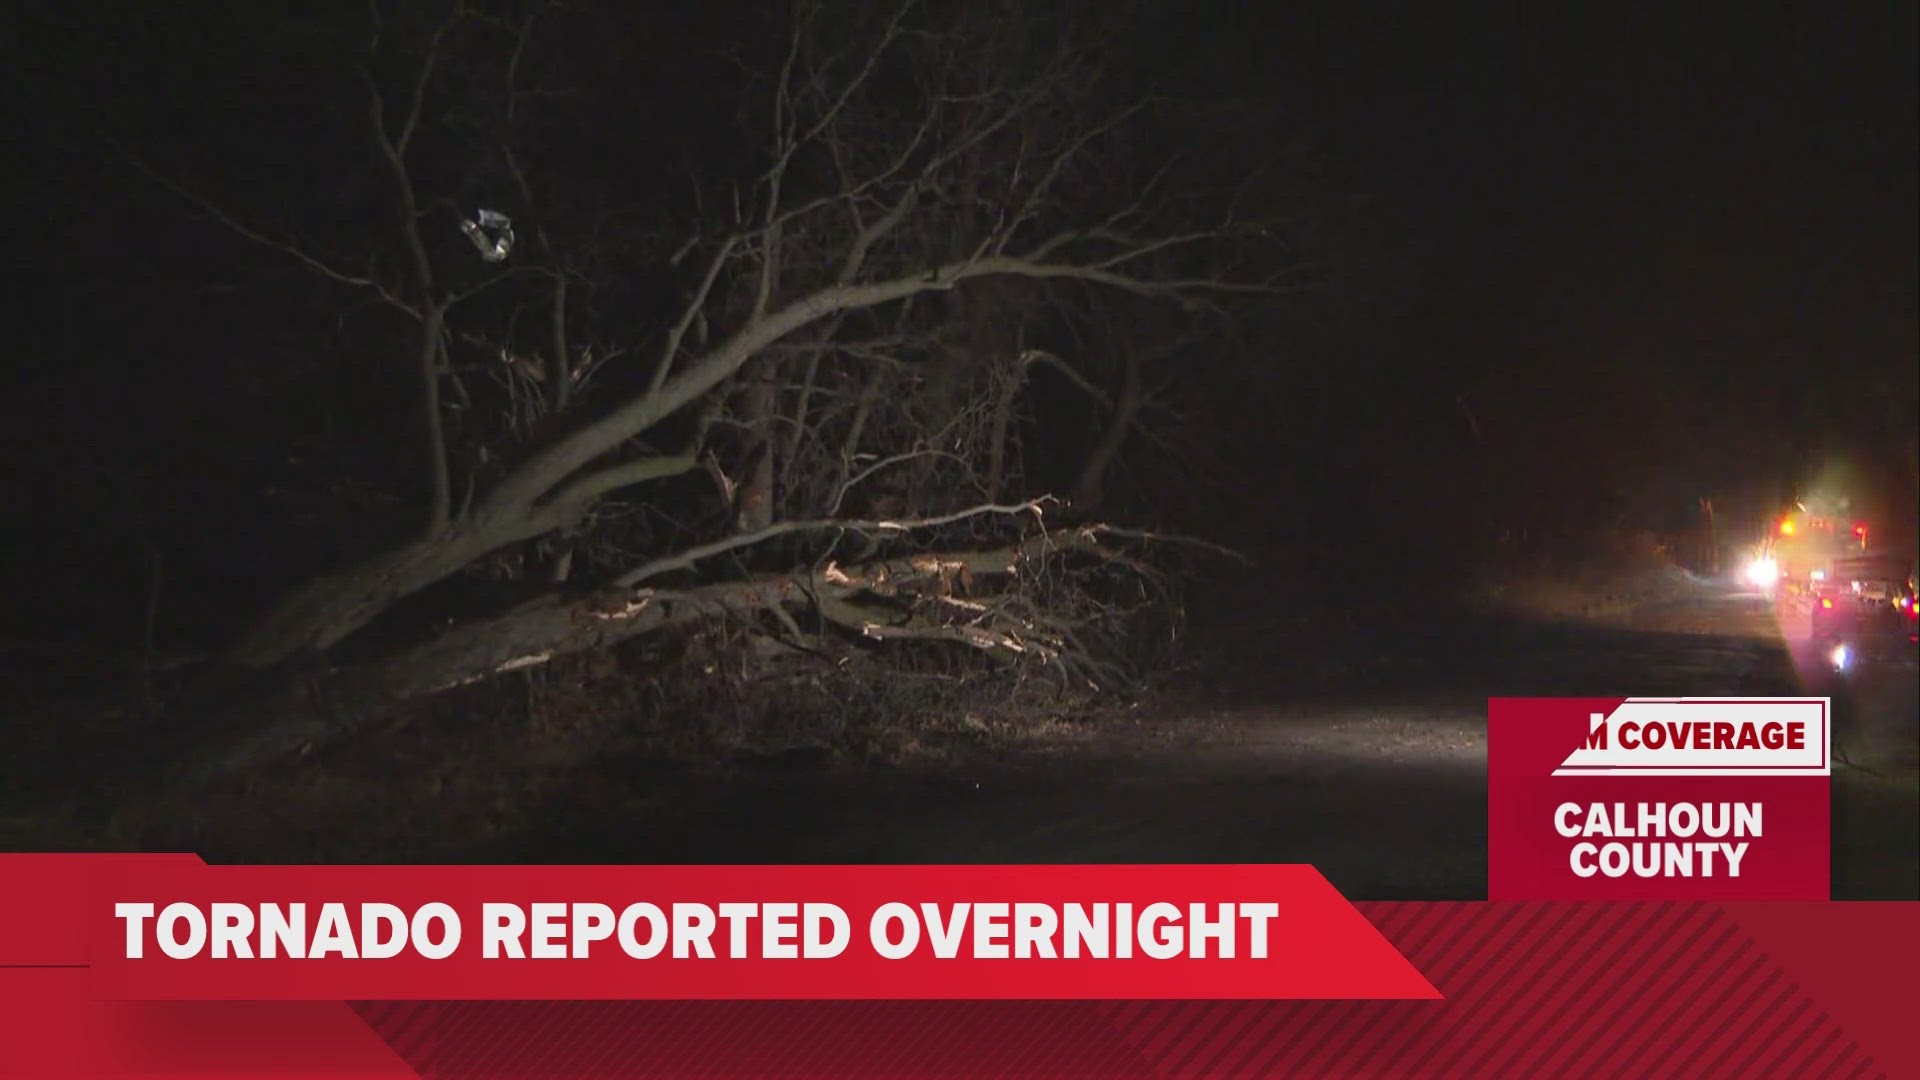 The storms brought large hail, strong winds and a reported tornado to West Michigan overnight.